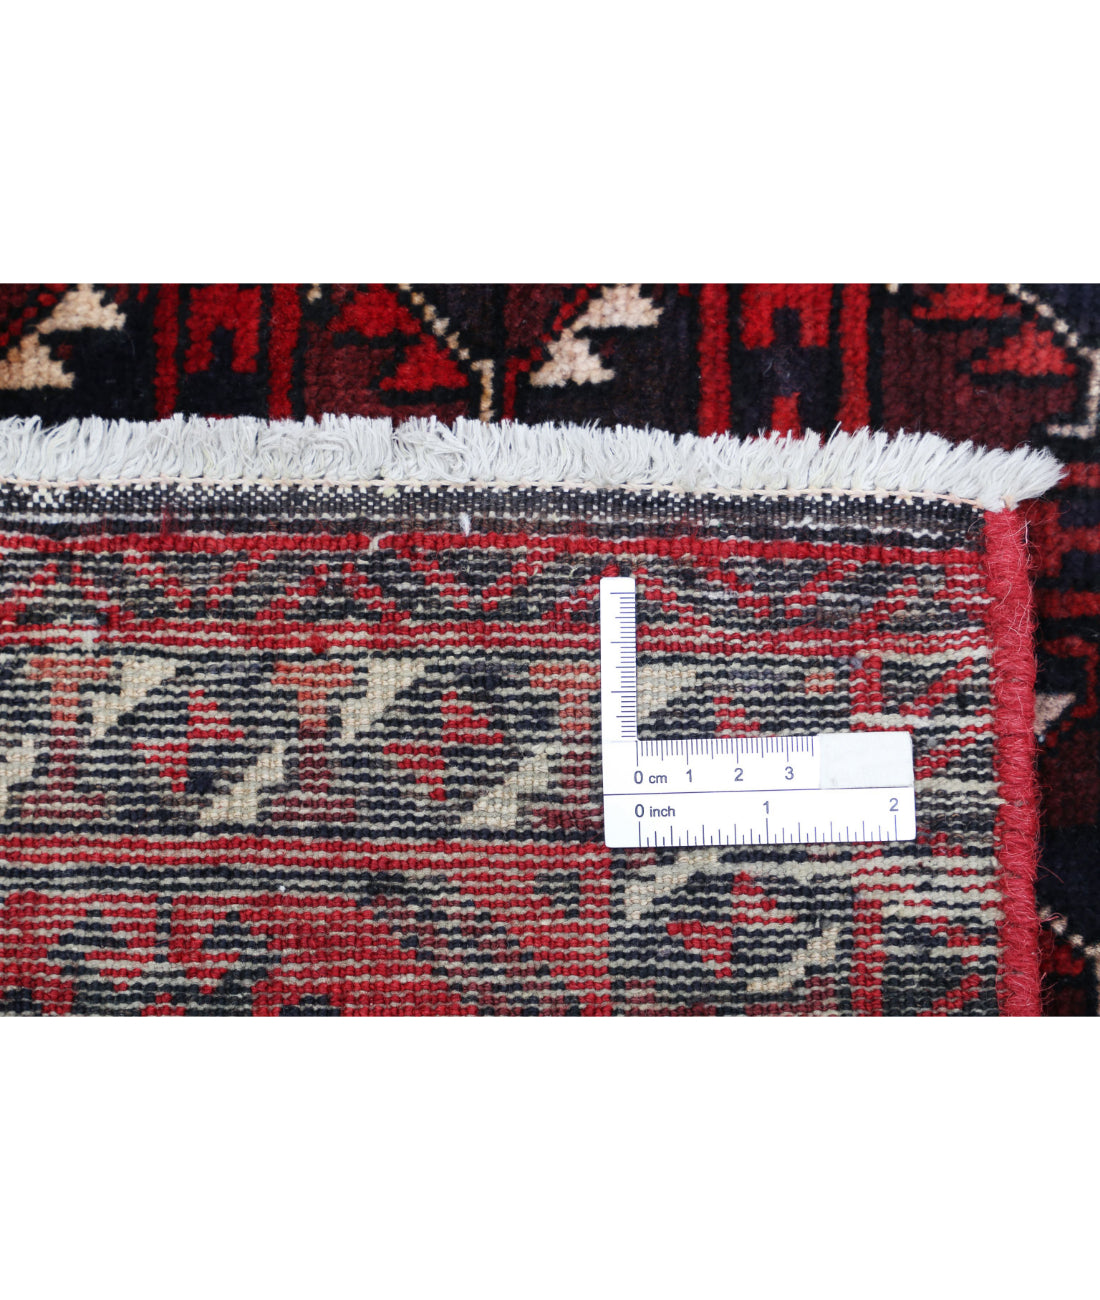 Hand Knotted Tribal Bokhara Wool Rug - 4'7'' x 7'7'' 4'7'' x 7'7'' (138 X 228) / Red / Blue